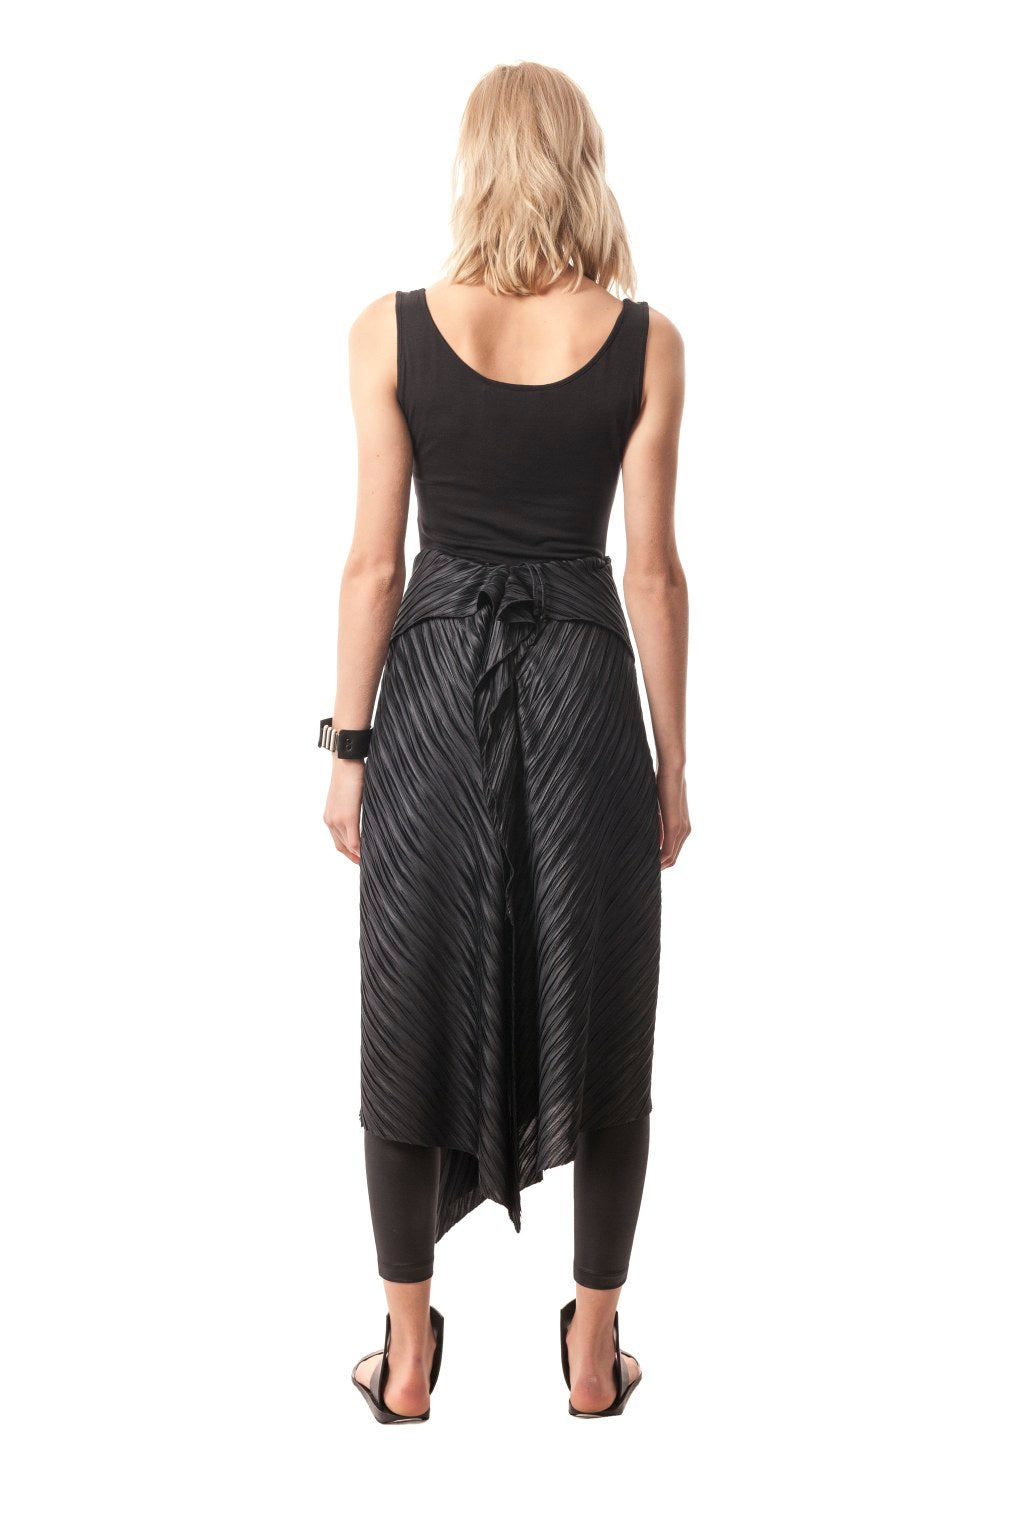 Pleated Convertible + Transformable Pleated Dress/Poncho/Shawl/Skirt/Cape/Wrap